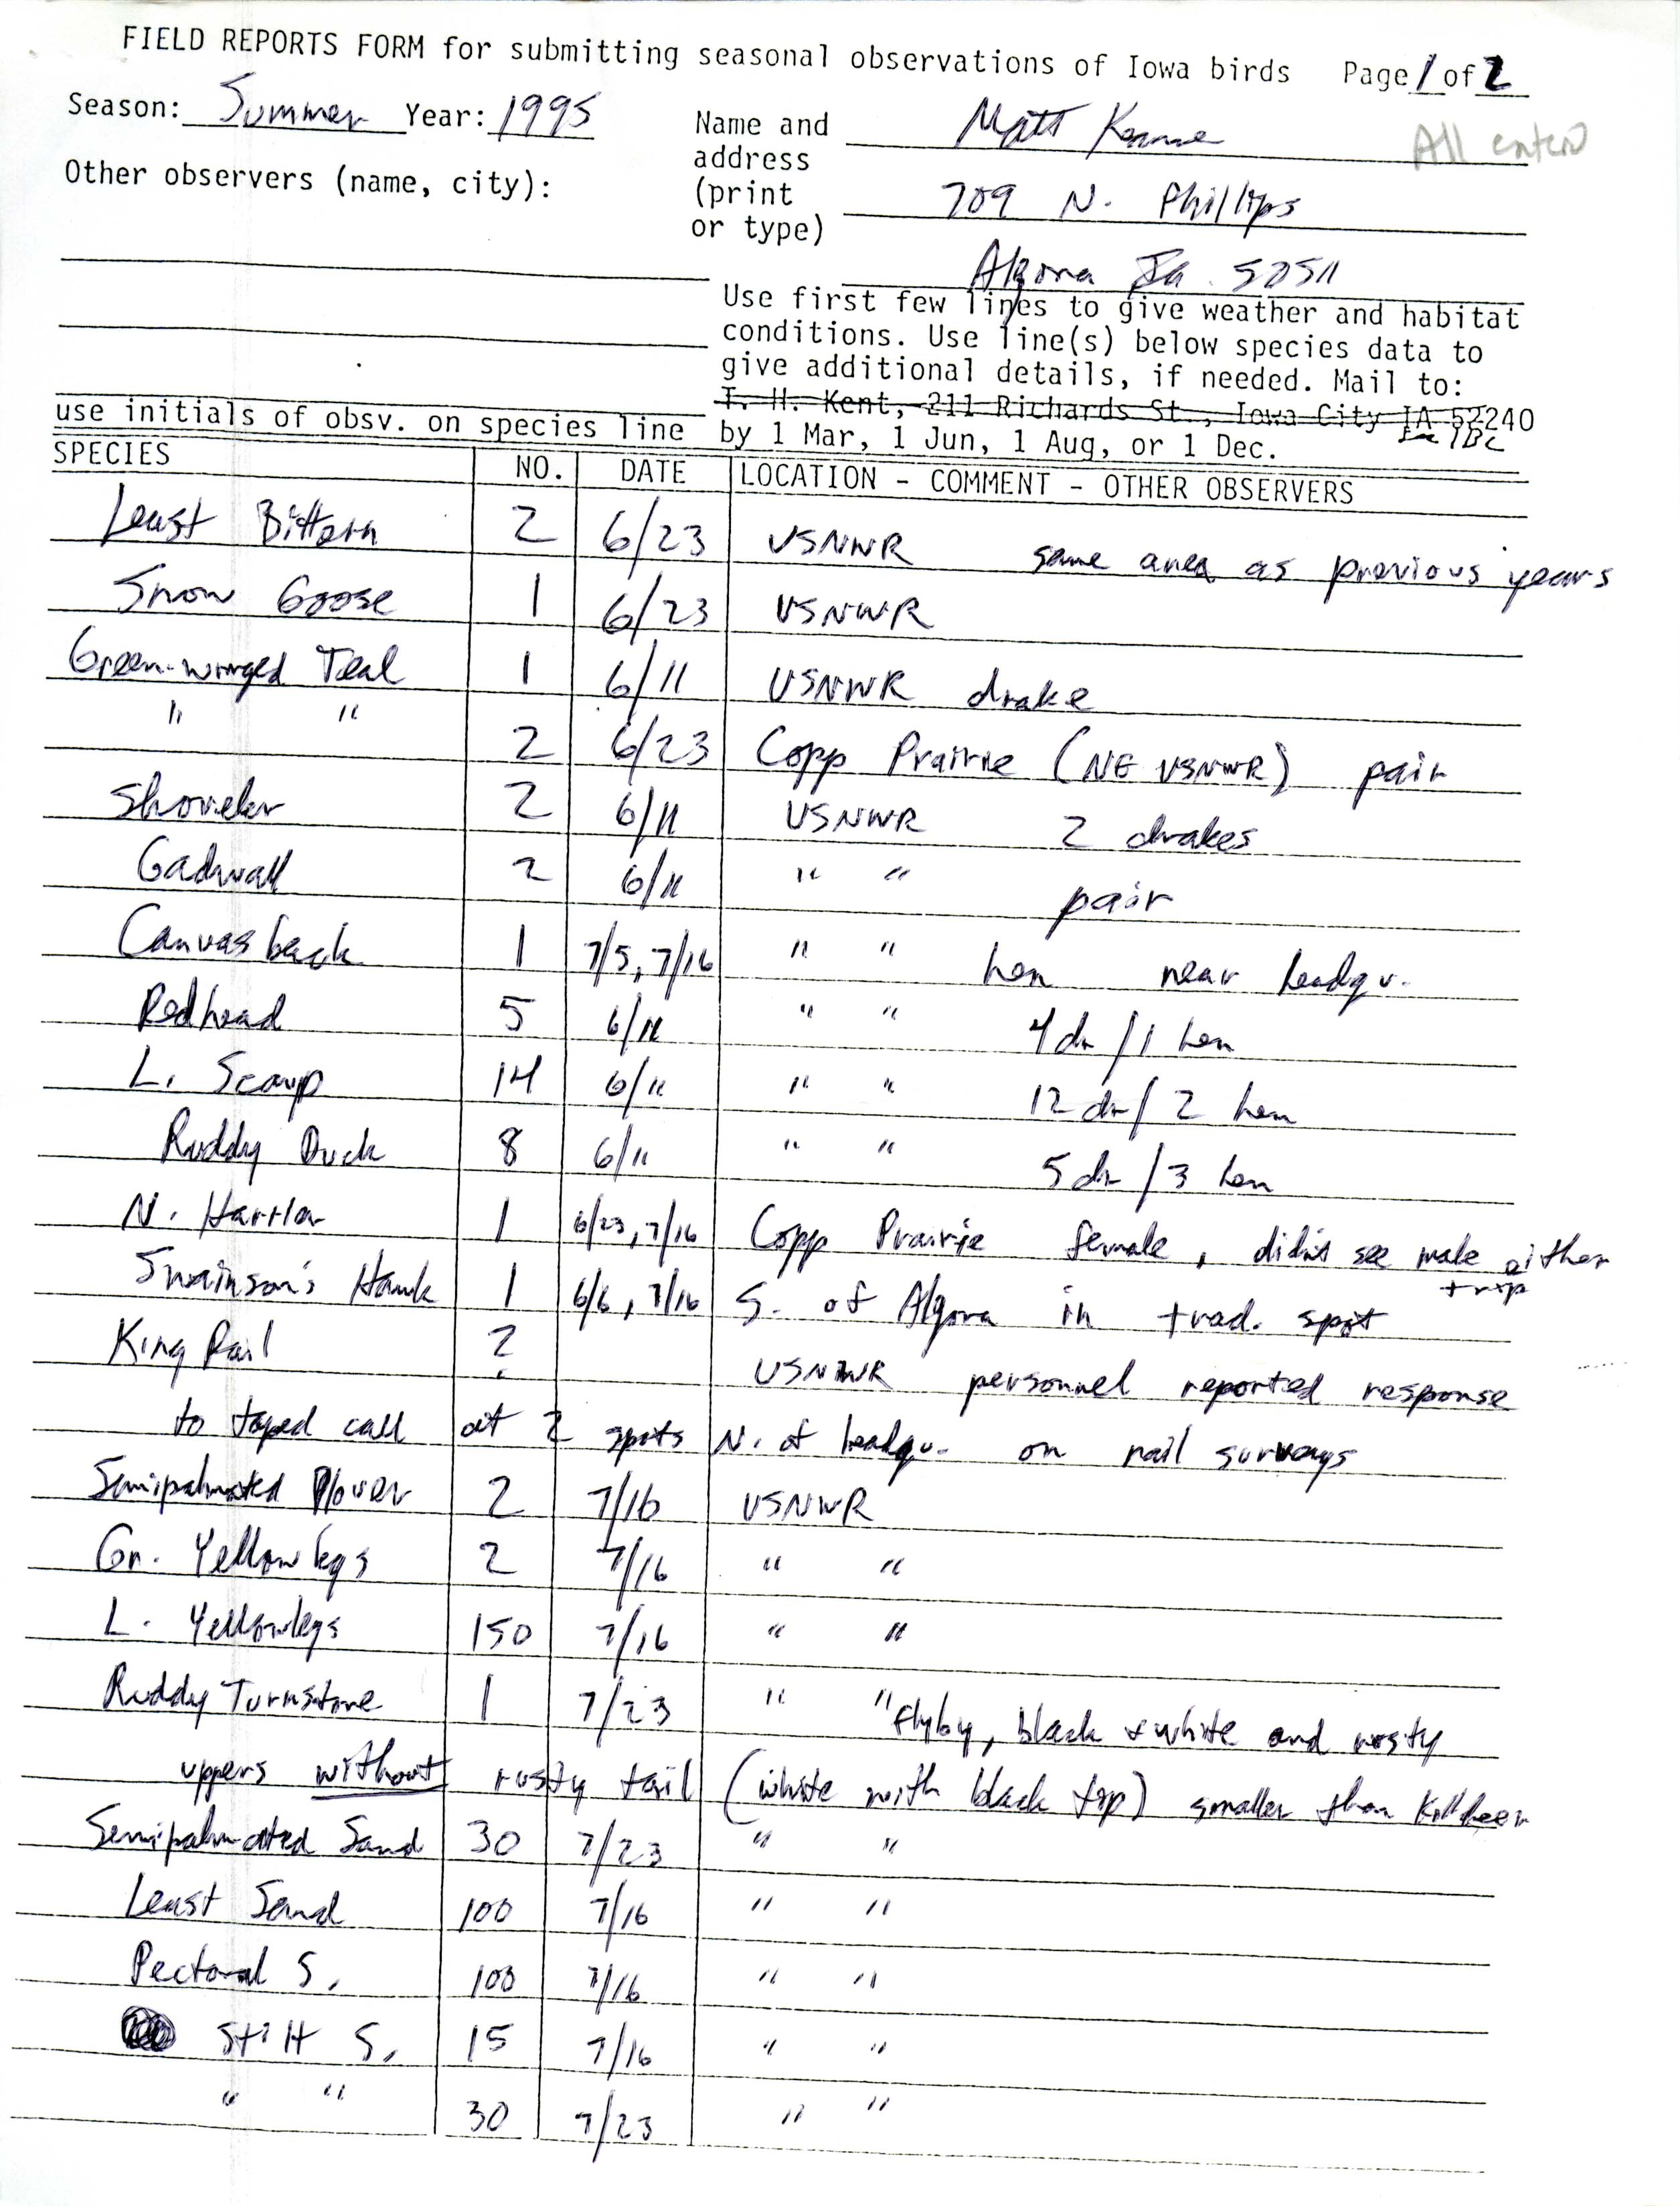 Field reports form for submitting seasonal observations of Iowa birds, summer 1995, Matt Kenne